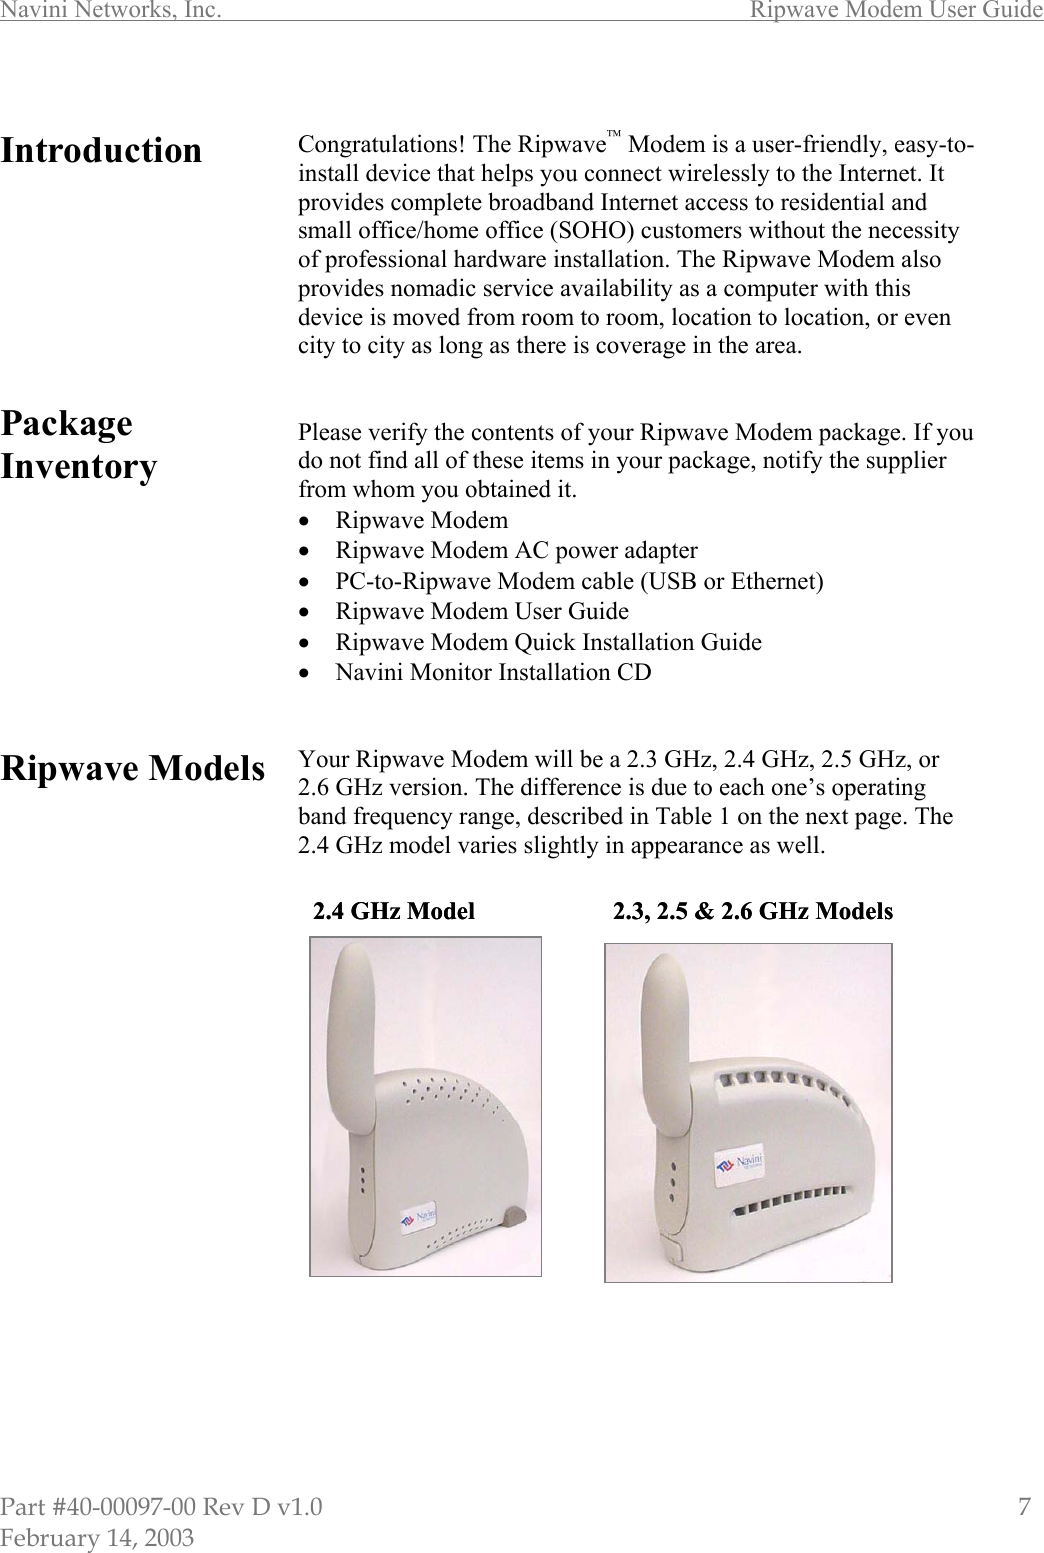 Navini Networks, Inc.        Ripwave Modem User Guide Part #40-00097-00 Rev D v1.0                         7 February 14, 2003  Introduction         Package Inventory          Ripwave Models                        Congratulations! The Ripwave Modem is a user-friendly, easy-to-install device that helps you connect wirelessly to the Internet. It provides complete broadband Internet access to residential and small office/home office (SOHO) customers without the necessity of professional hardware installation. The Ripwave Modem also provides nomadic service availability as a computer with this device is moved from room to room, location to location, or even city to city as long as there is coverage in the area.   Please verify the contents of your Ripwave Modem package. If you do not find all of these items in your package, notify the supplier from whom you obtained it. •  Ripwave Modem •  Ripwave Modem AC power adapter •  PC-to-Ripwave Modem cable (USB or Ethernet) •  Ripwave Modem User Guide •  Ripwave Modem Quick Installation Guide •  Navini Monitor Installation CD   Your Ripwave Modem will be a 2.3 GHz, 2.4 GHz, 2.5 GHz, or 2.6 GHz version. The difference is due to each one’s operating band frequency range, described in Table 1 on the next page. The 2.4 GHz model varies slightly in appearance as well.                      2.4 GHz Model 2.3, 2.5 &amp; 2.6 GHz Models 2.4 GHz Model 2.3, 2.5 &amp; 2.6 GHz Models